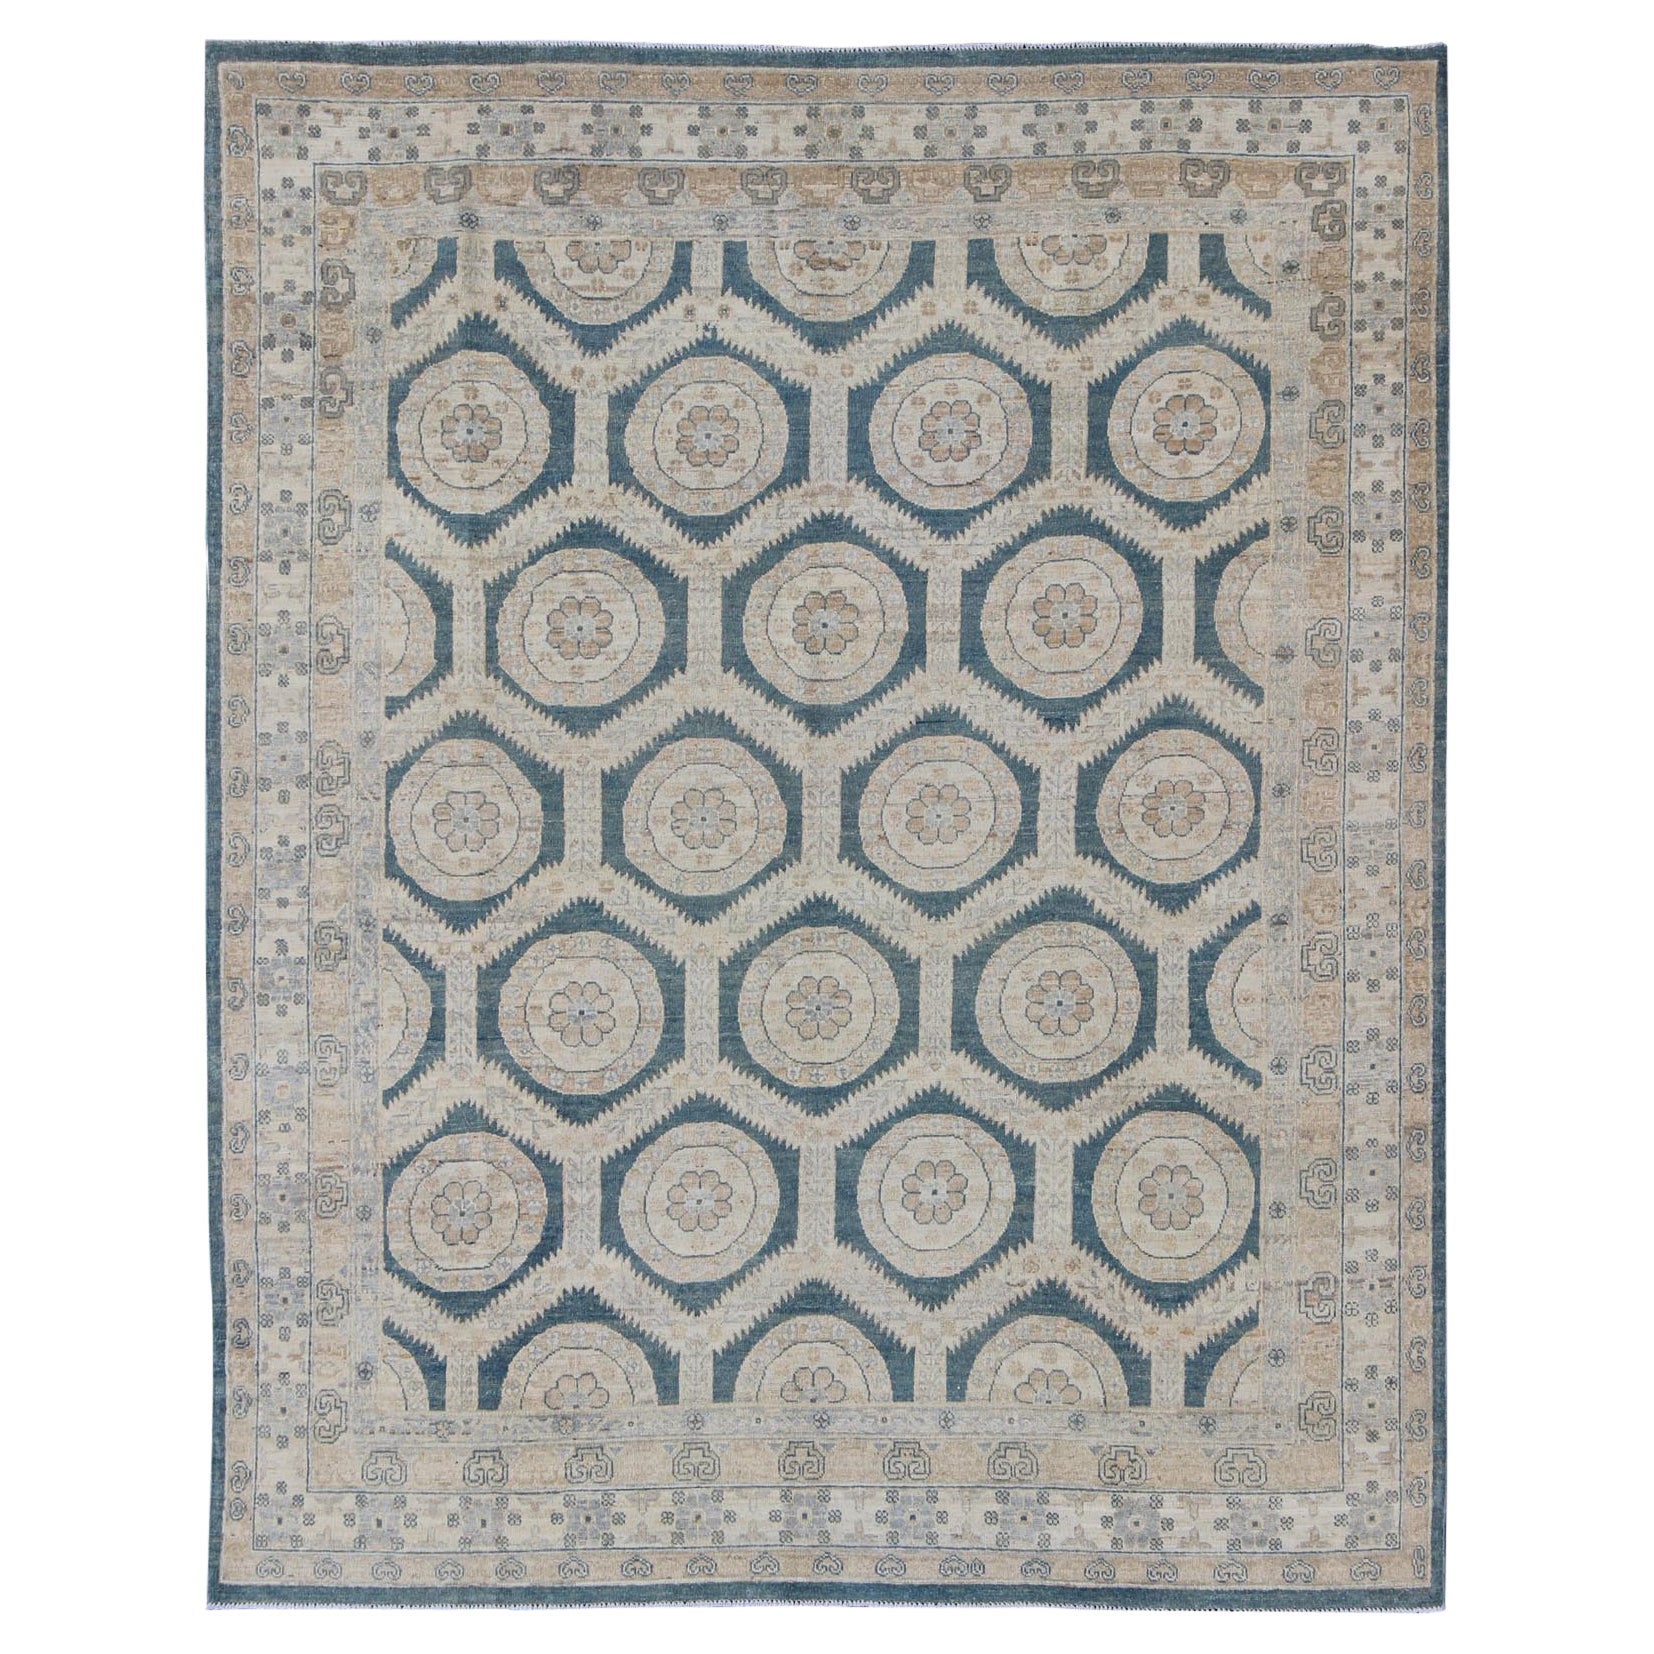 Khotan Design Rug with Geometric Medallions in Tan, Blue Gray & Teal Blue For Sale